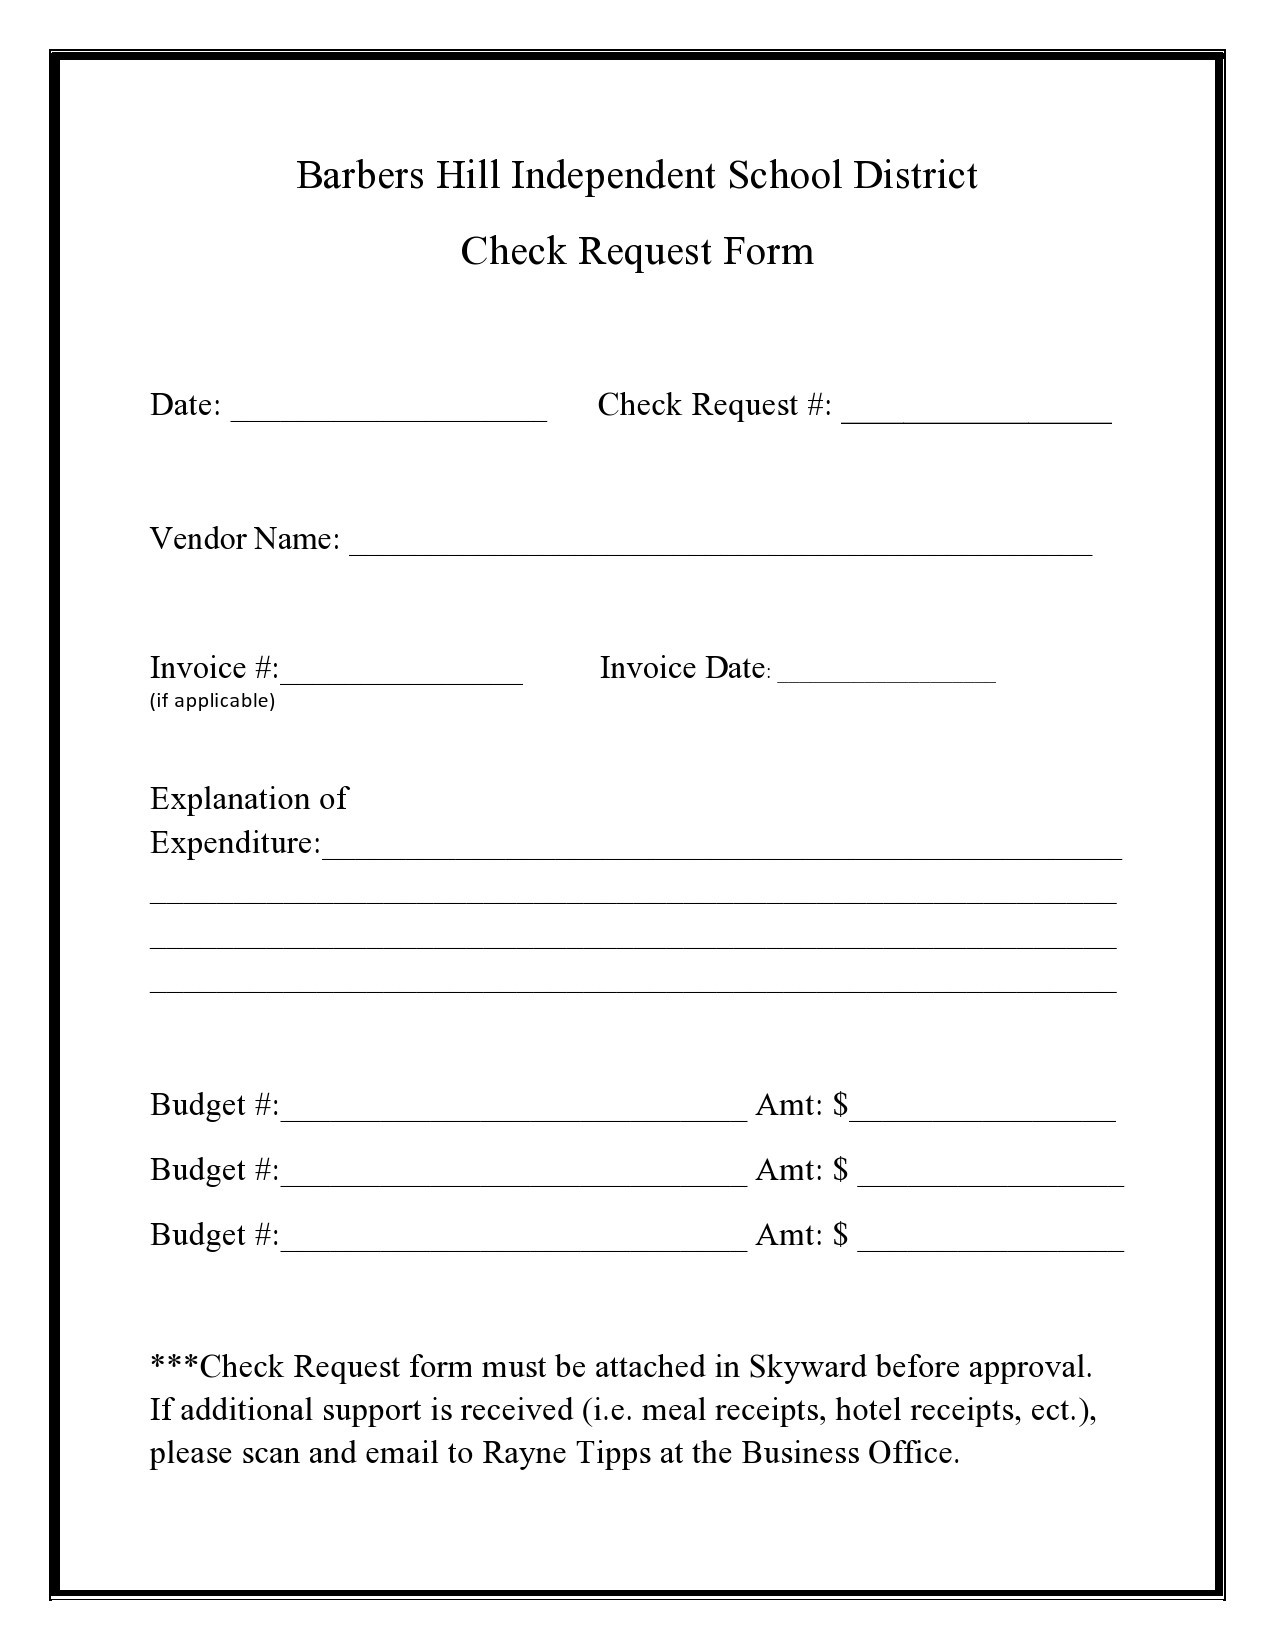 Free check request form 49